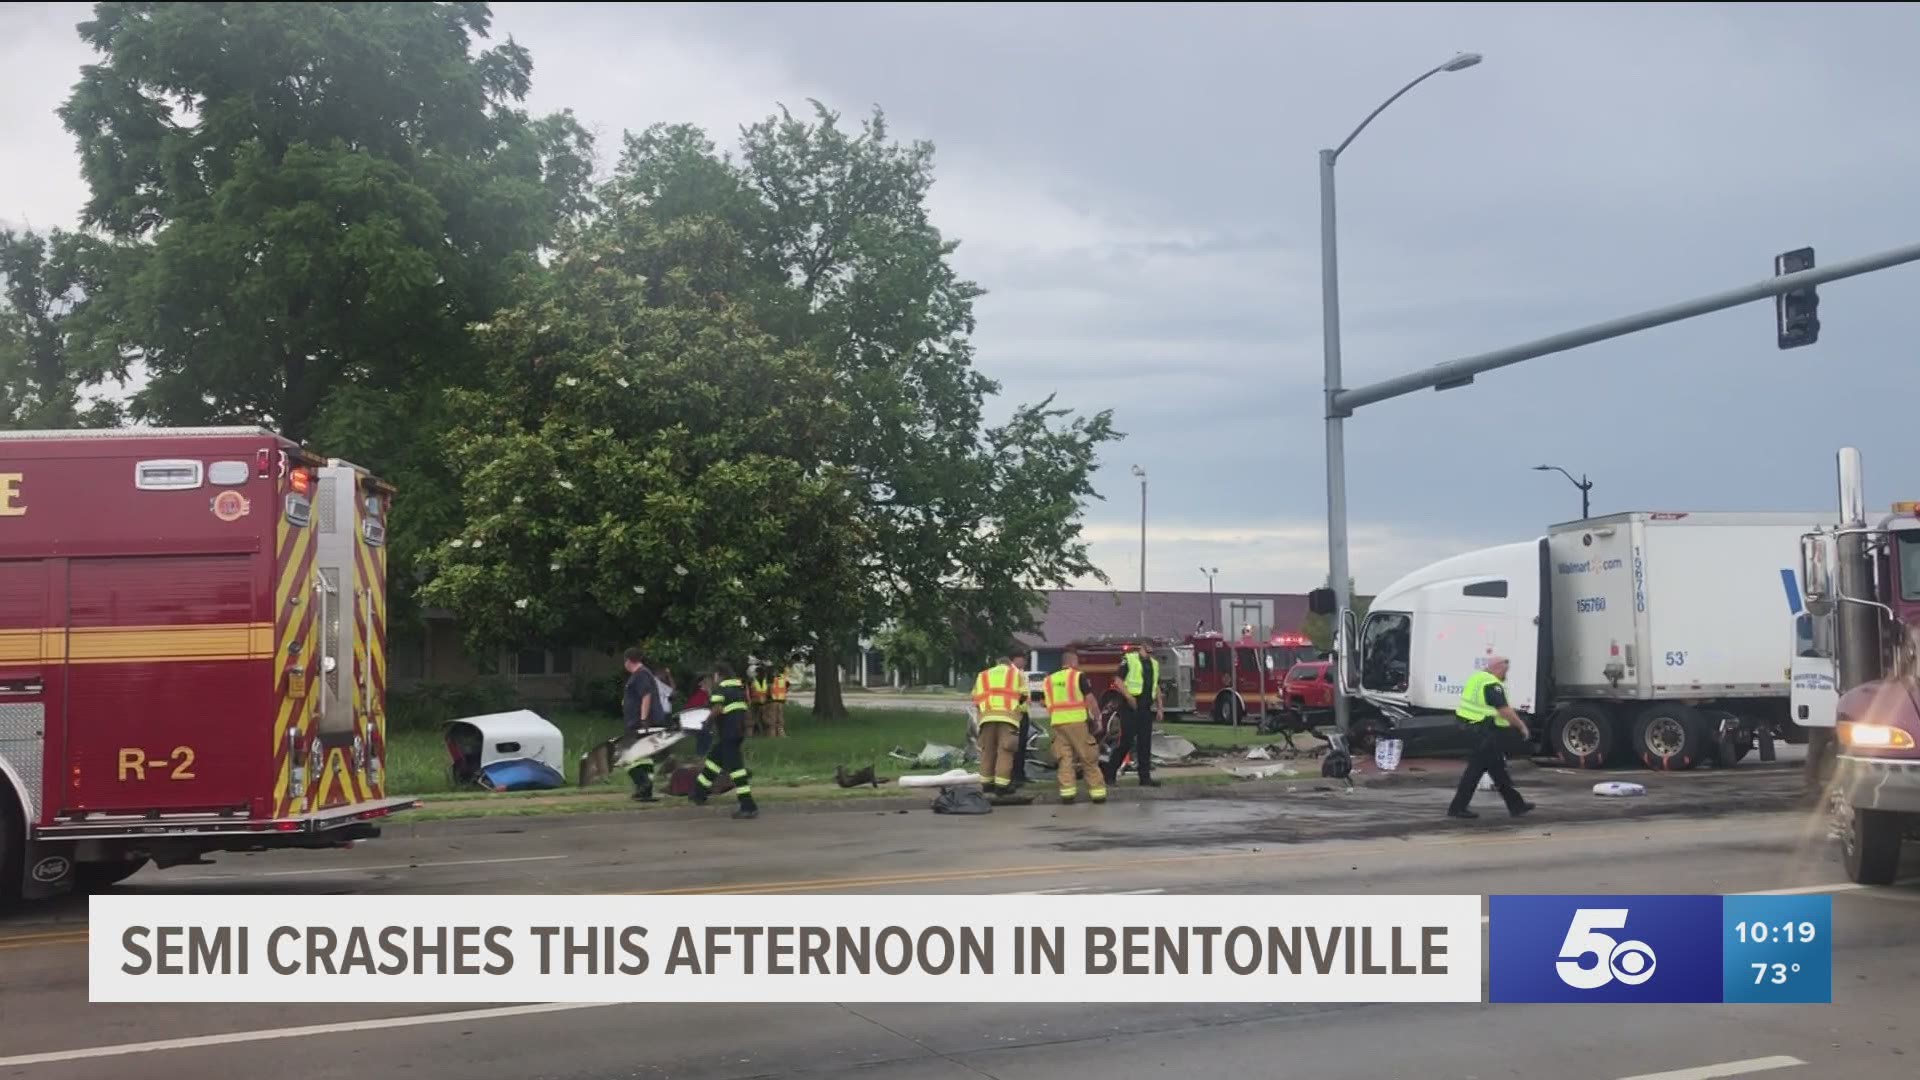 A semi crashed into a stoplight this afternoon (June 26) in Bentonville.